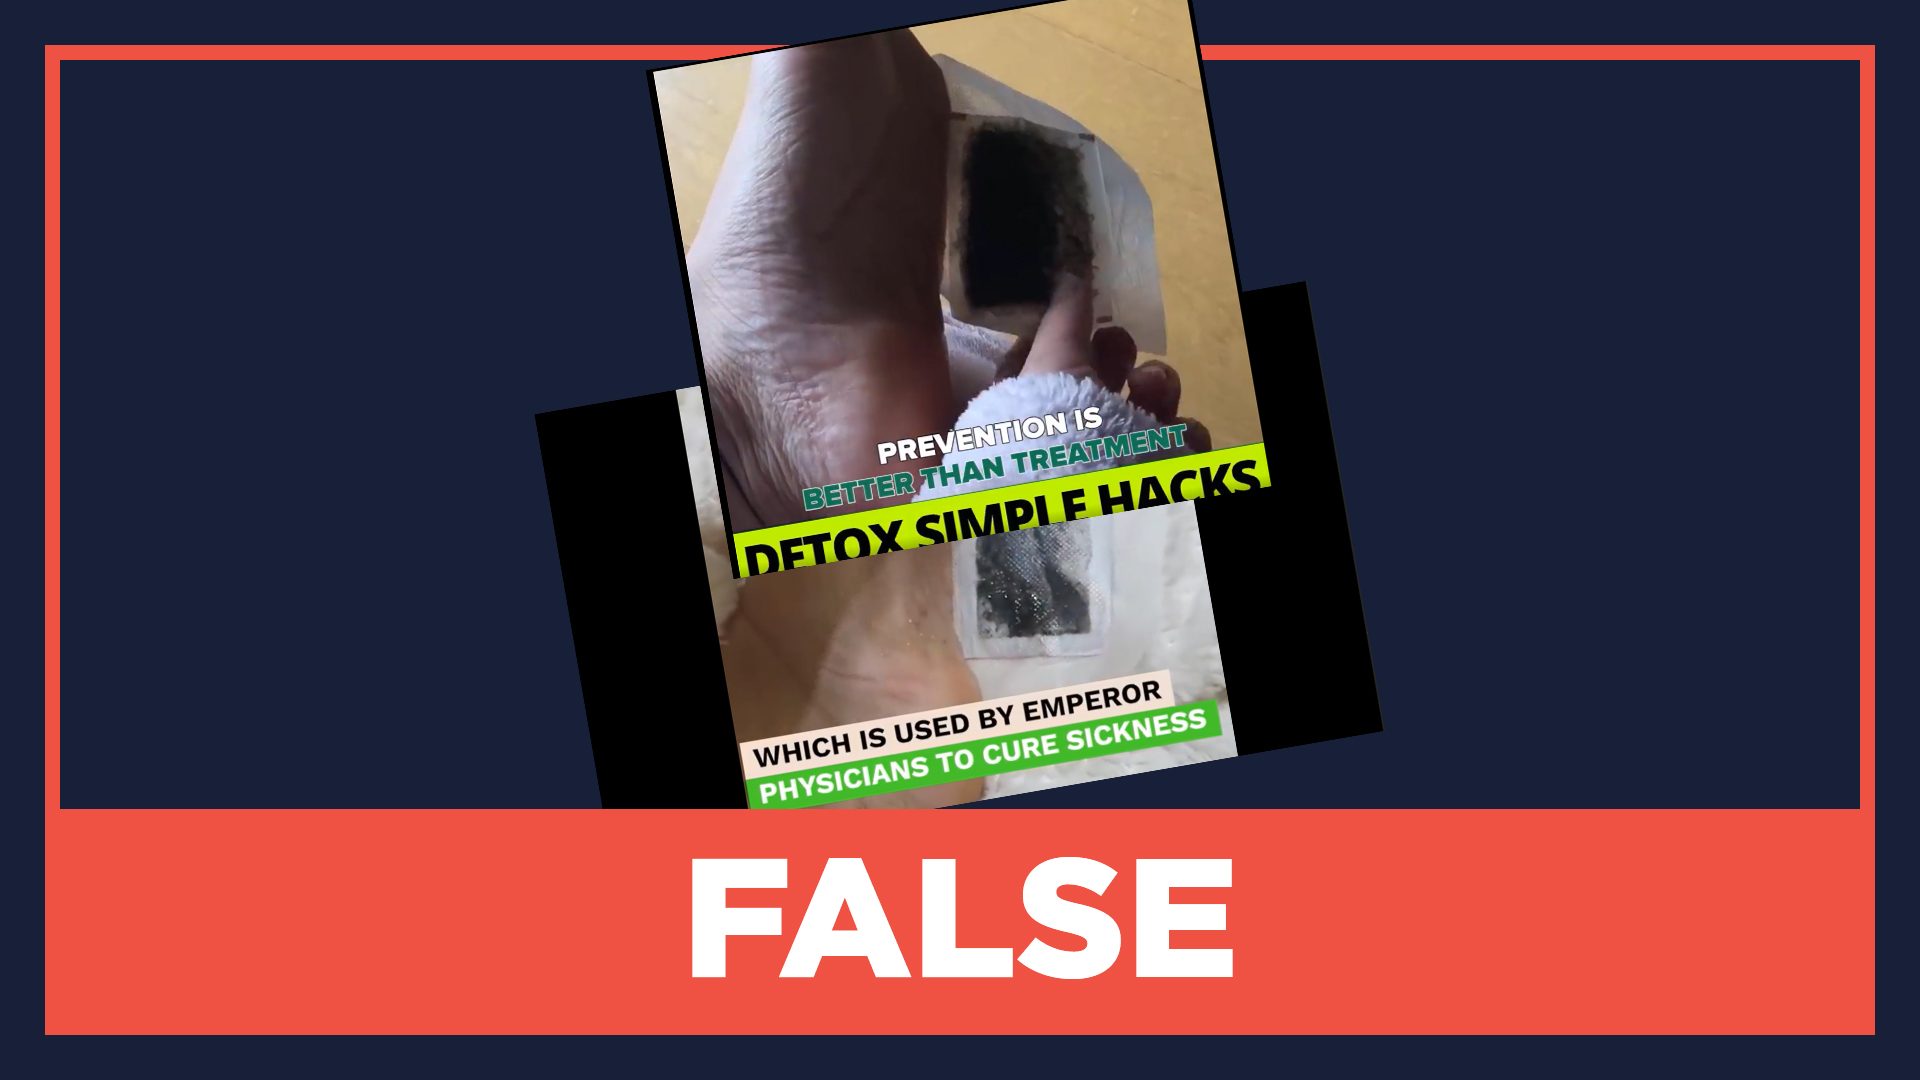 FALSE: Foot pads can detoxify the body, reduce risk of cancer and stroke